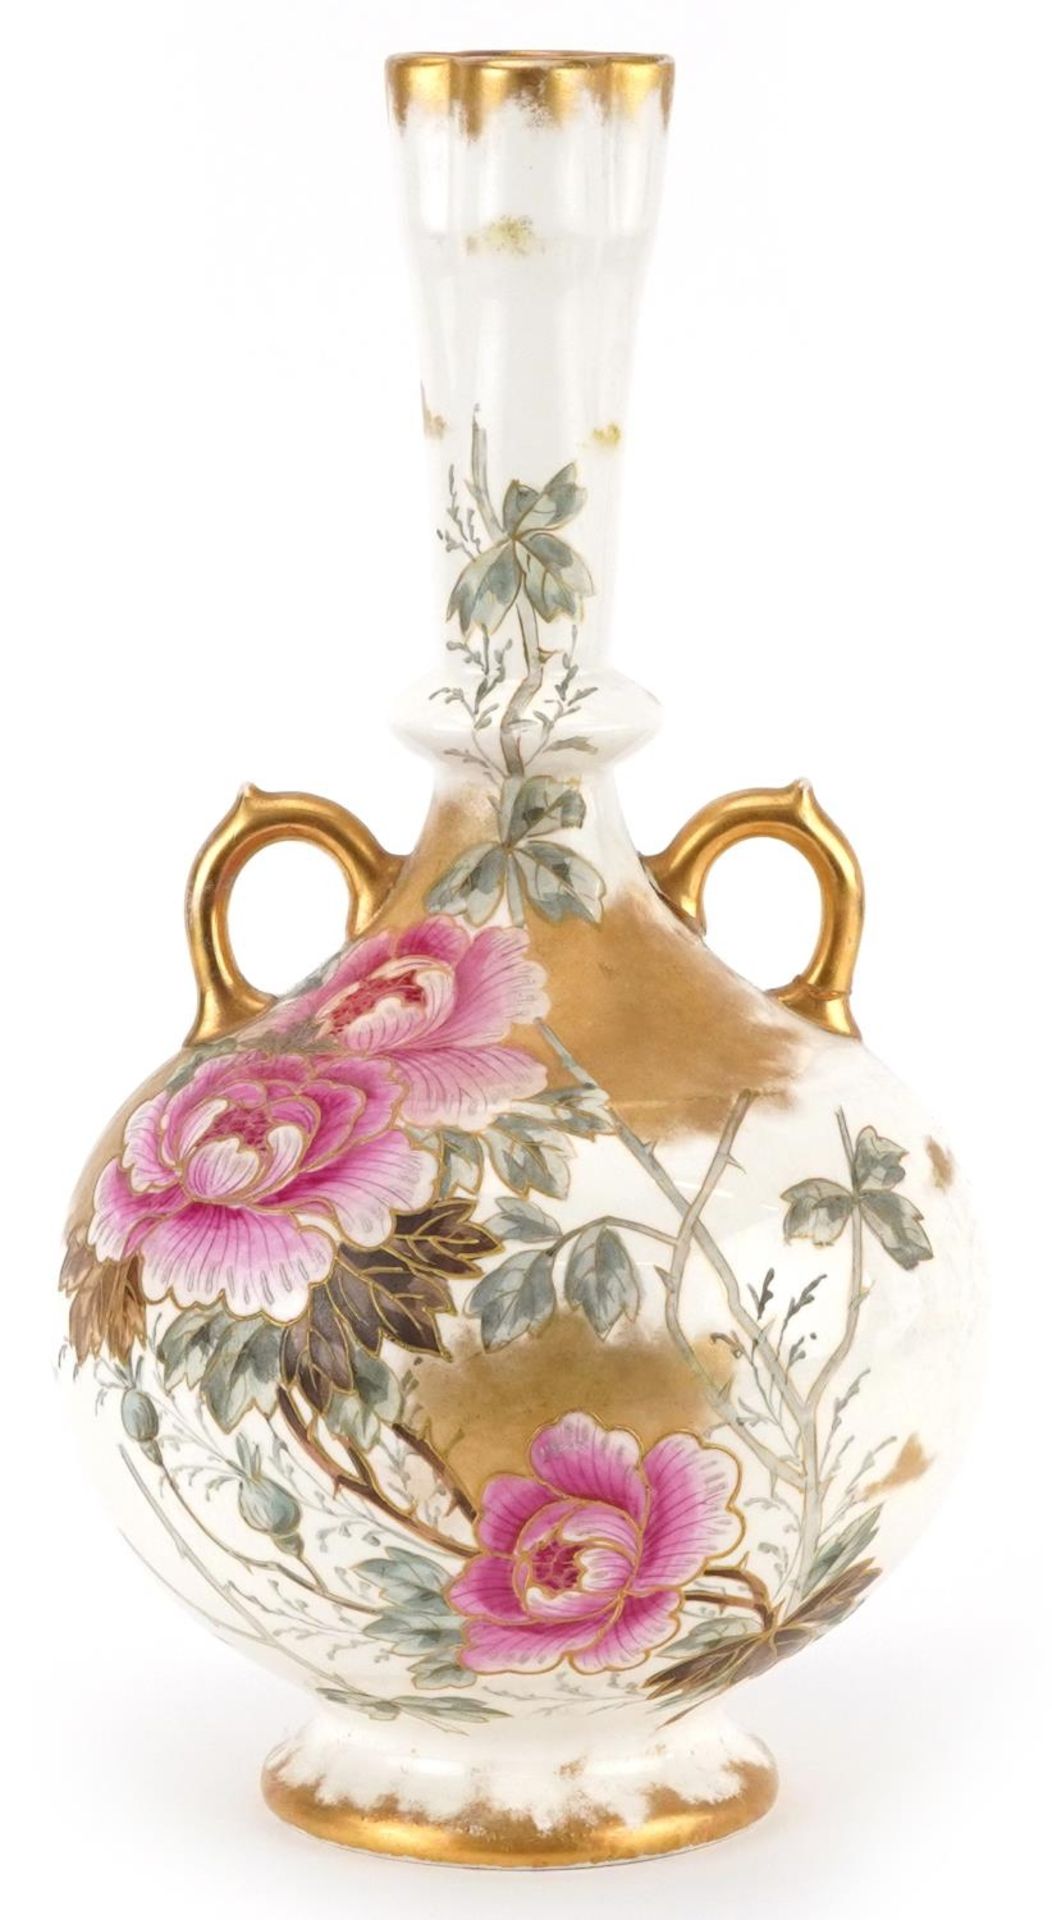 Bonn, 19th century German porcelain vase with twin handles hand painted and gilded with flowers,